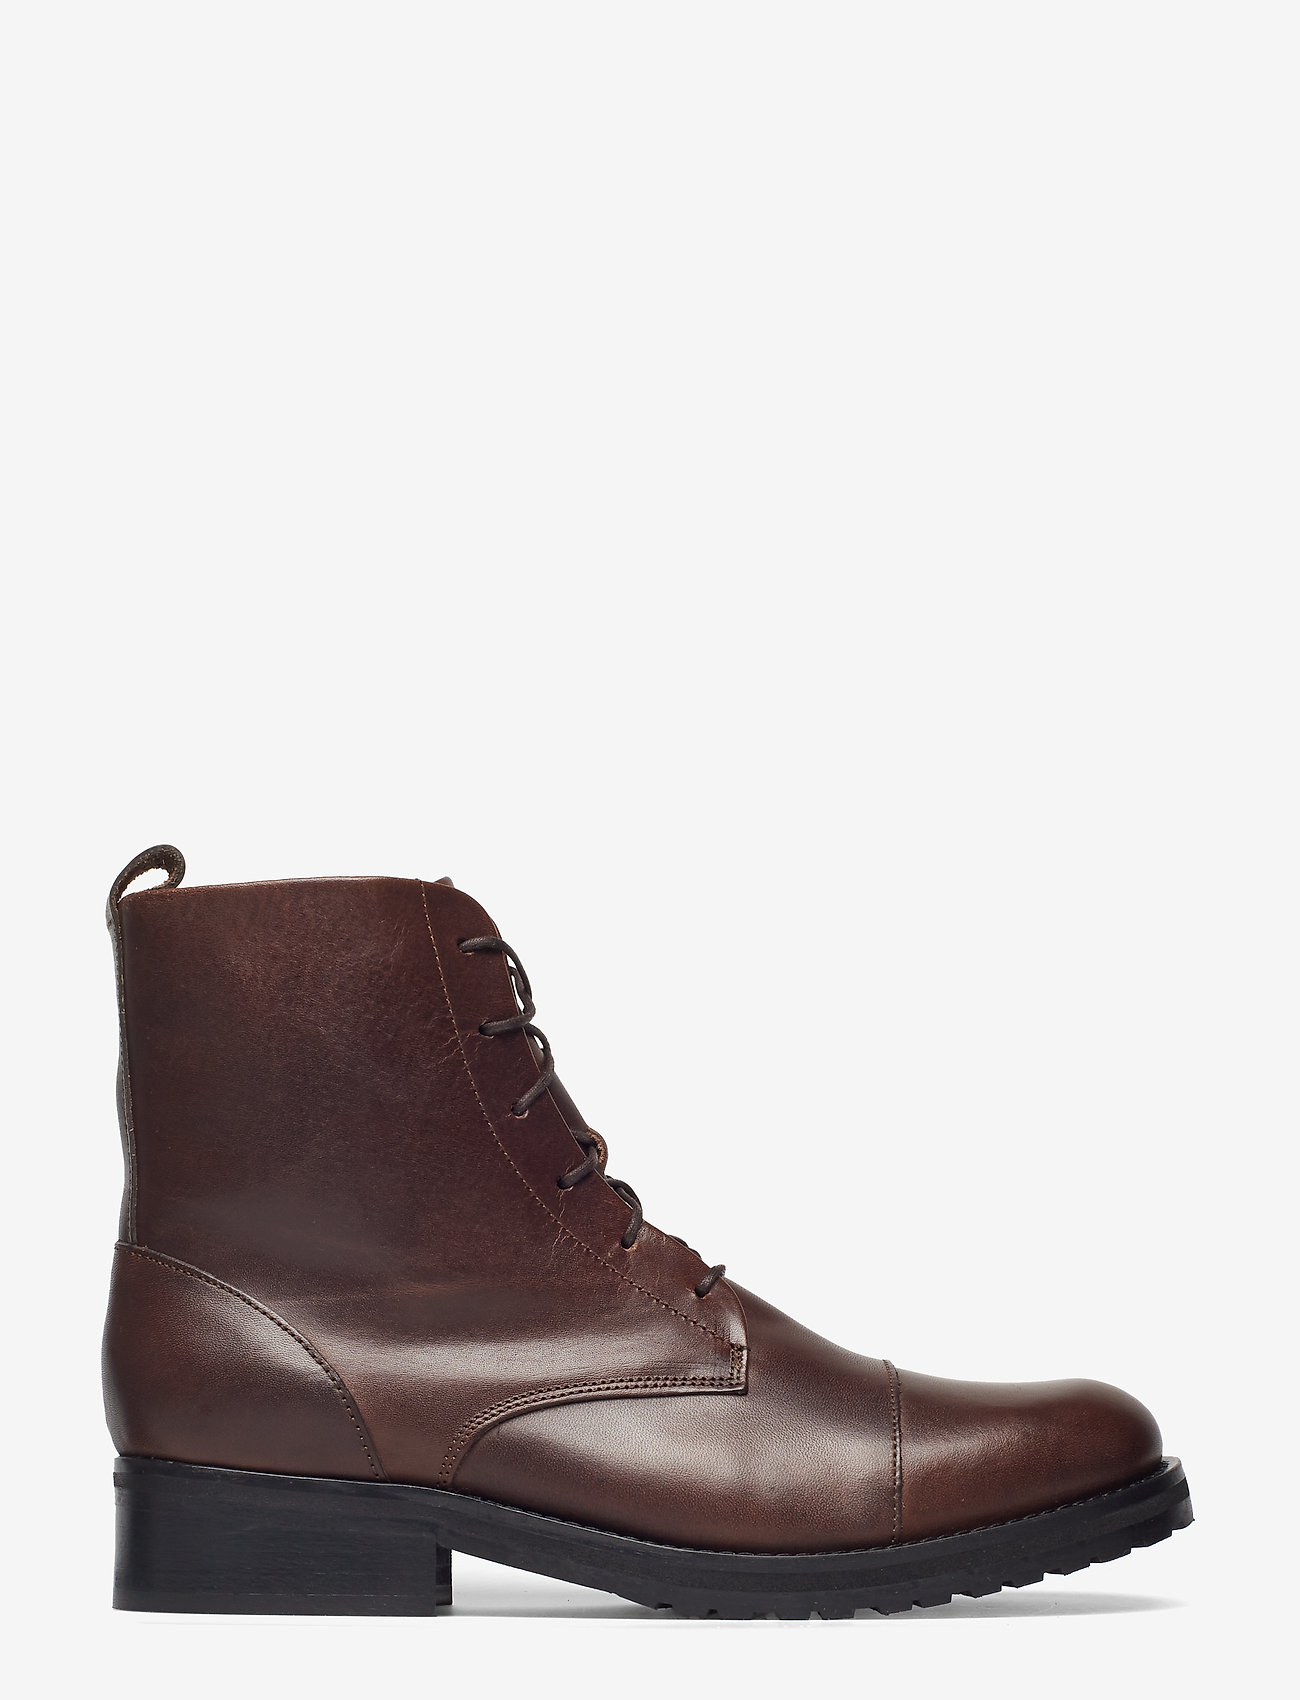 Royal RepubliQ - Ave Lace Up Boot - brown - 1